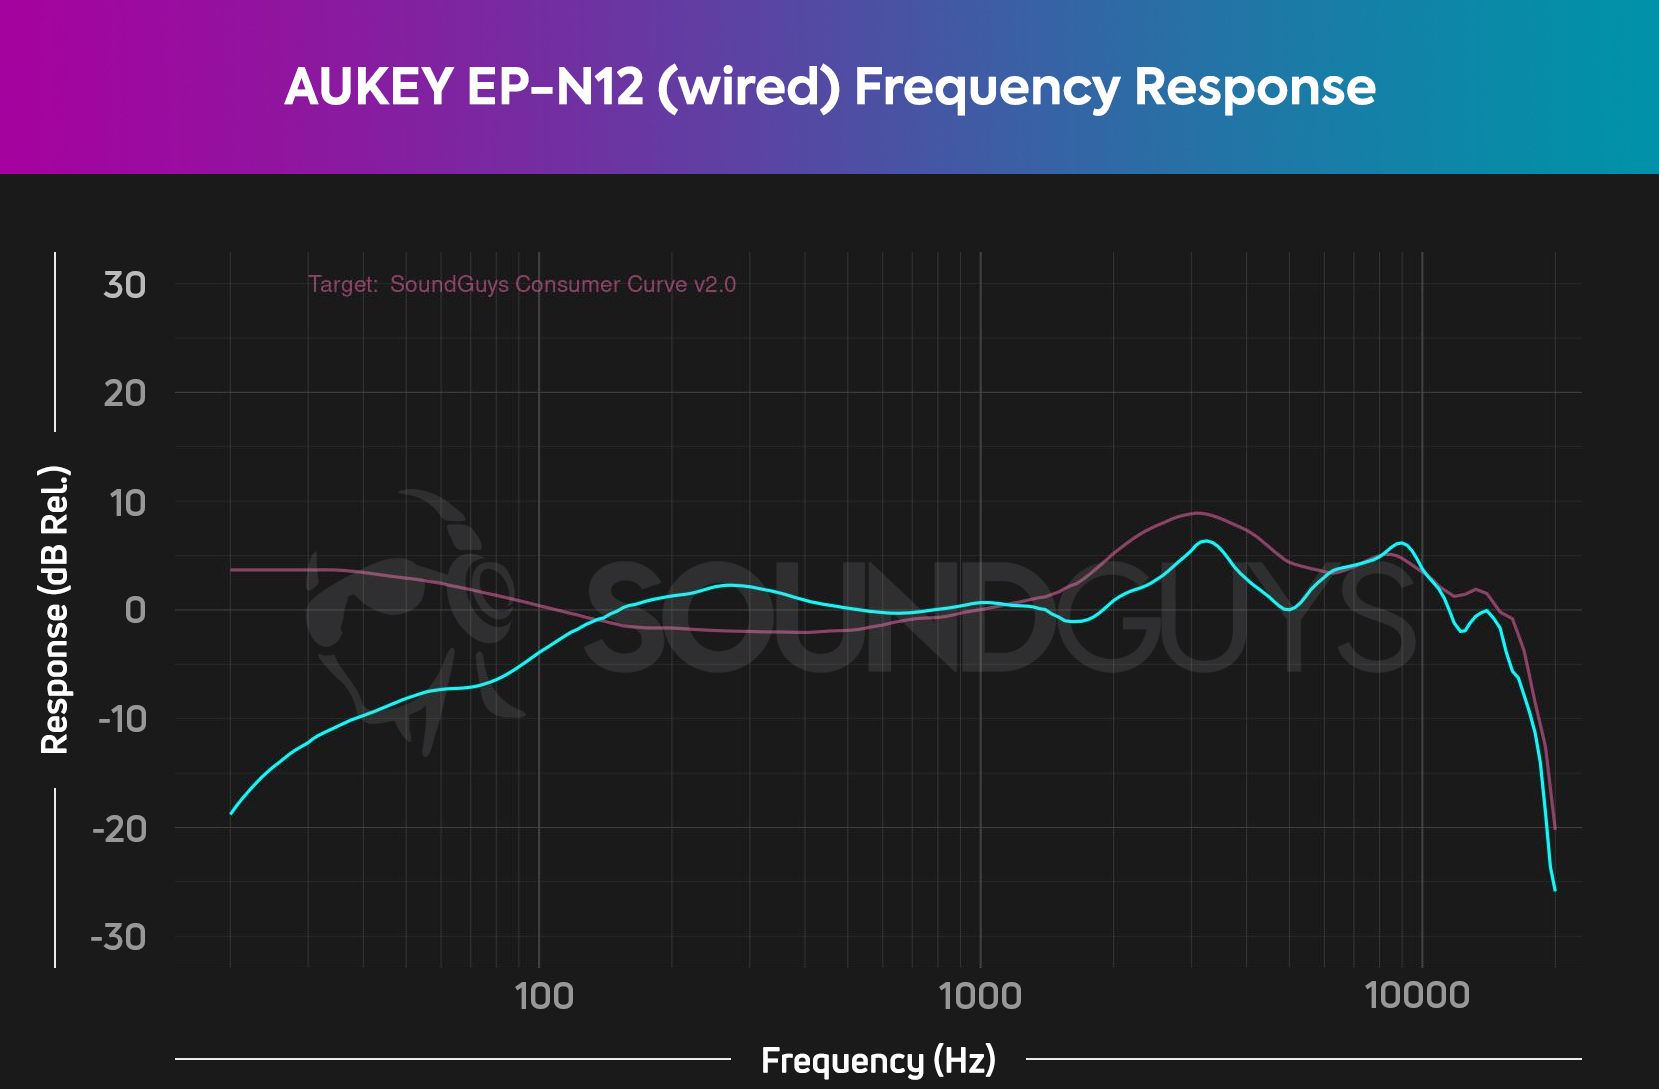 Chart of AUKEY EP-N12 frequency response over a hardwired connection.